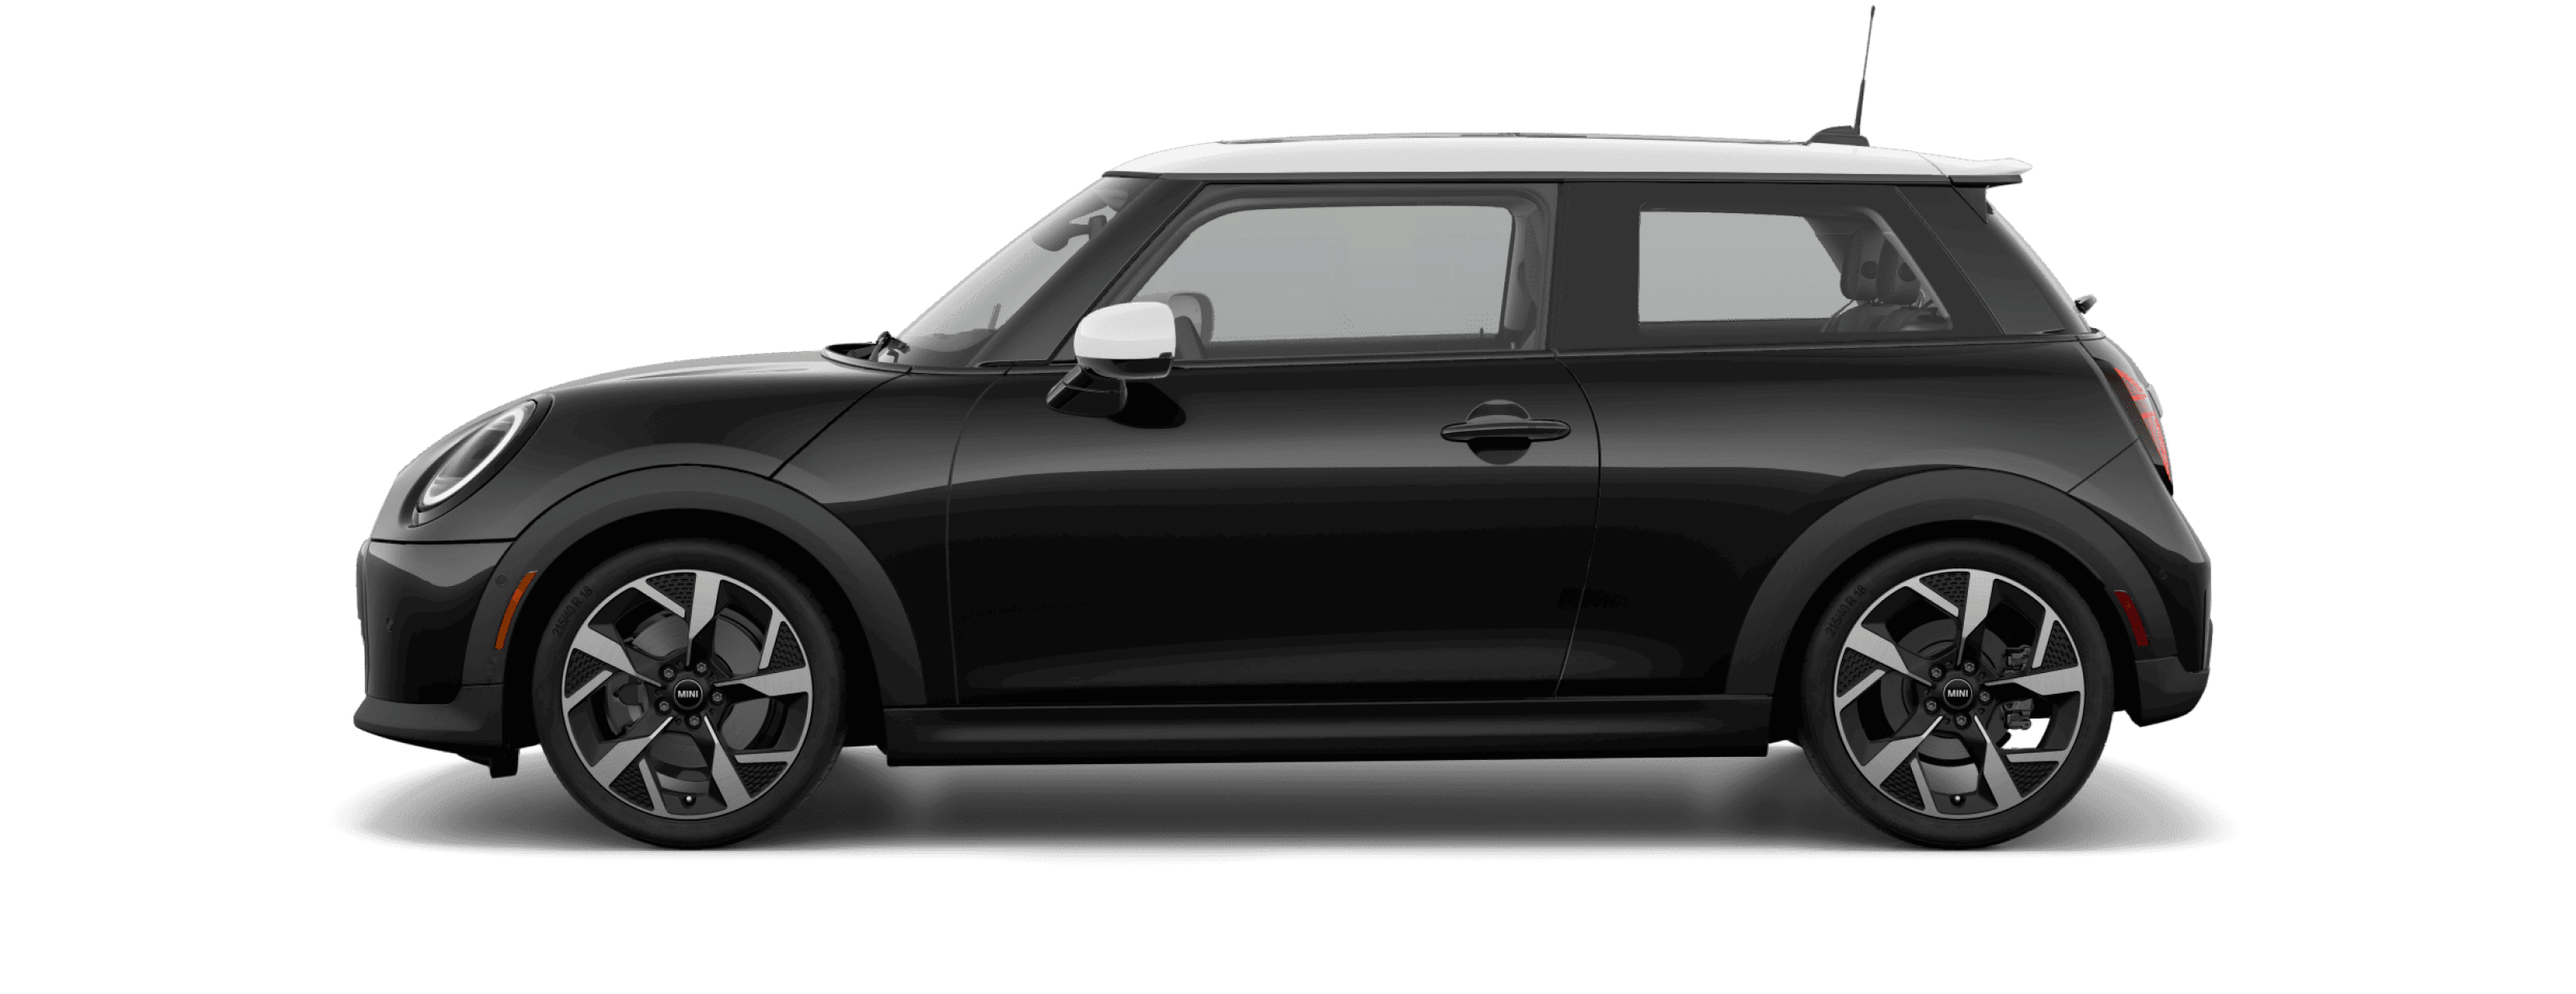 Side view of a 2025 MINI Cooper S 2 Door in the Midnight Black II Metallic body color, facing left with its shadow underneath it.